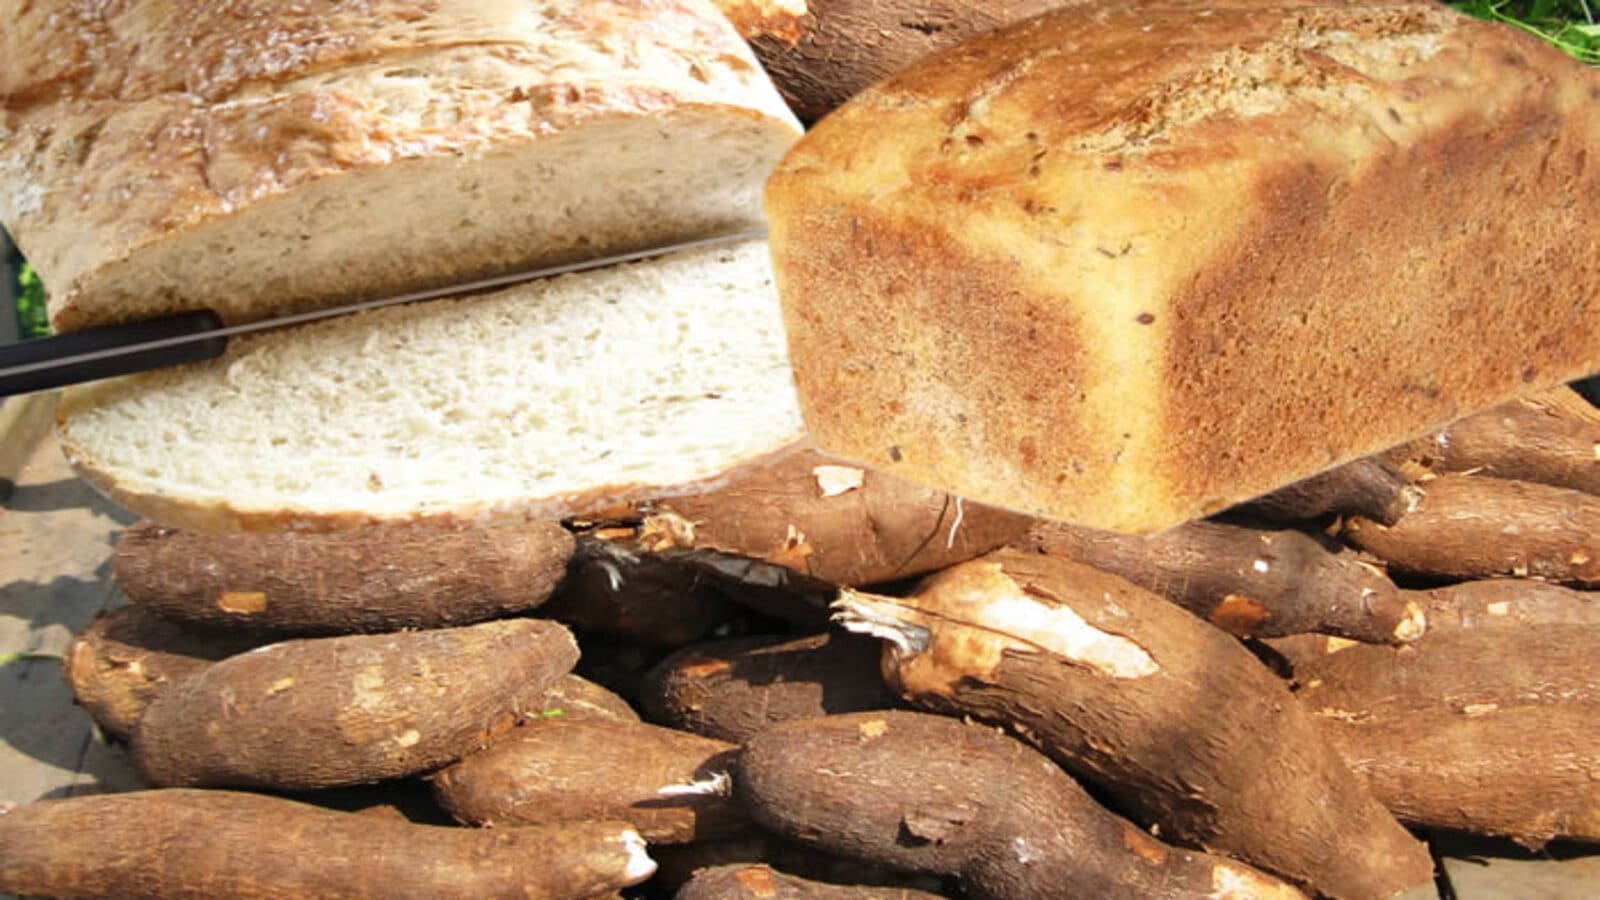 Use cassava in bread making to manage surging wheat prices, Tanzanian bakers urged